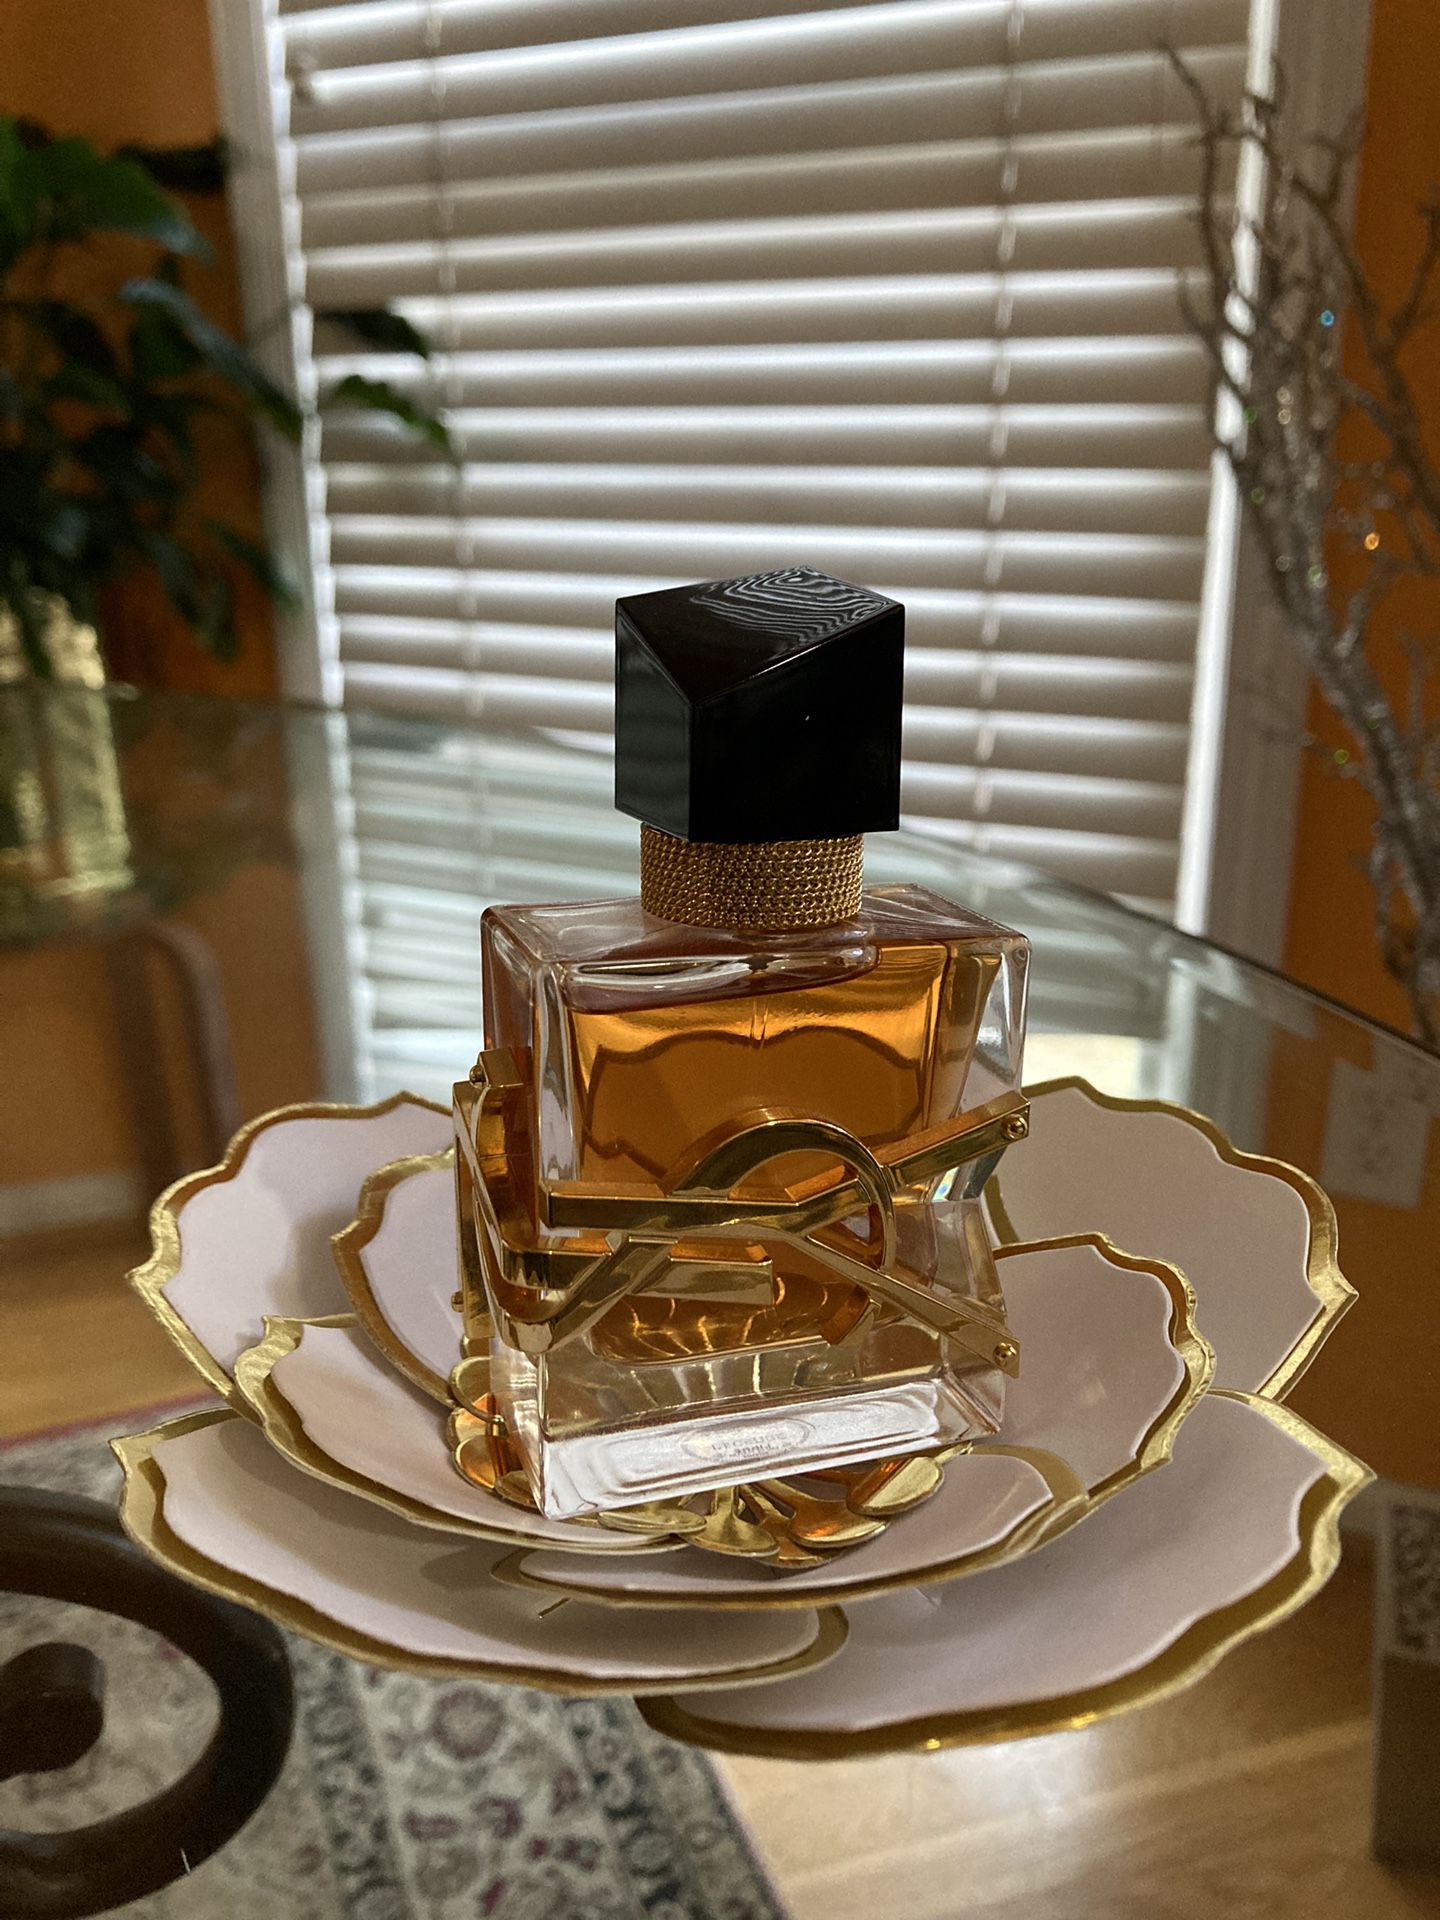 YSL Libre Le Parfum - 10ml 5ml Decant Fragrance for Sale in Stanton, CA -  OfferUp